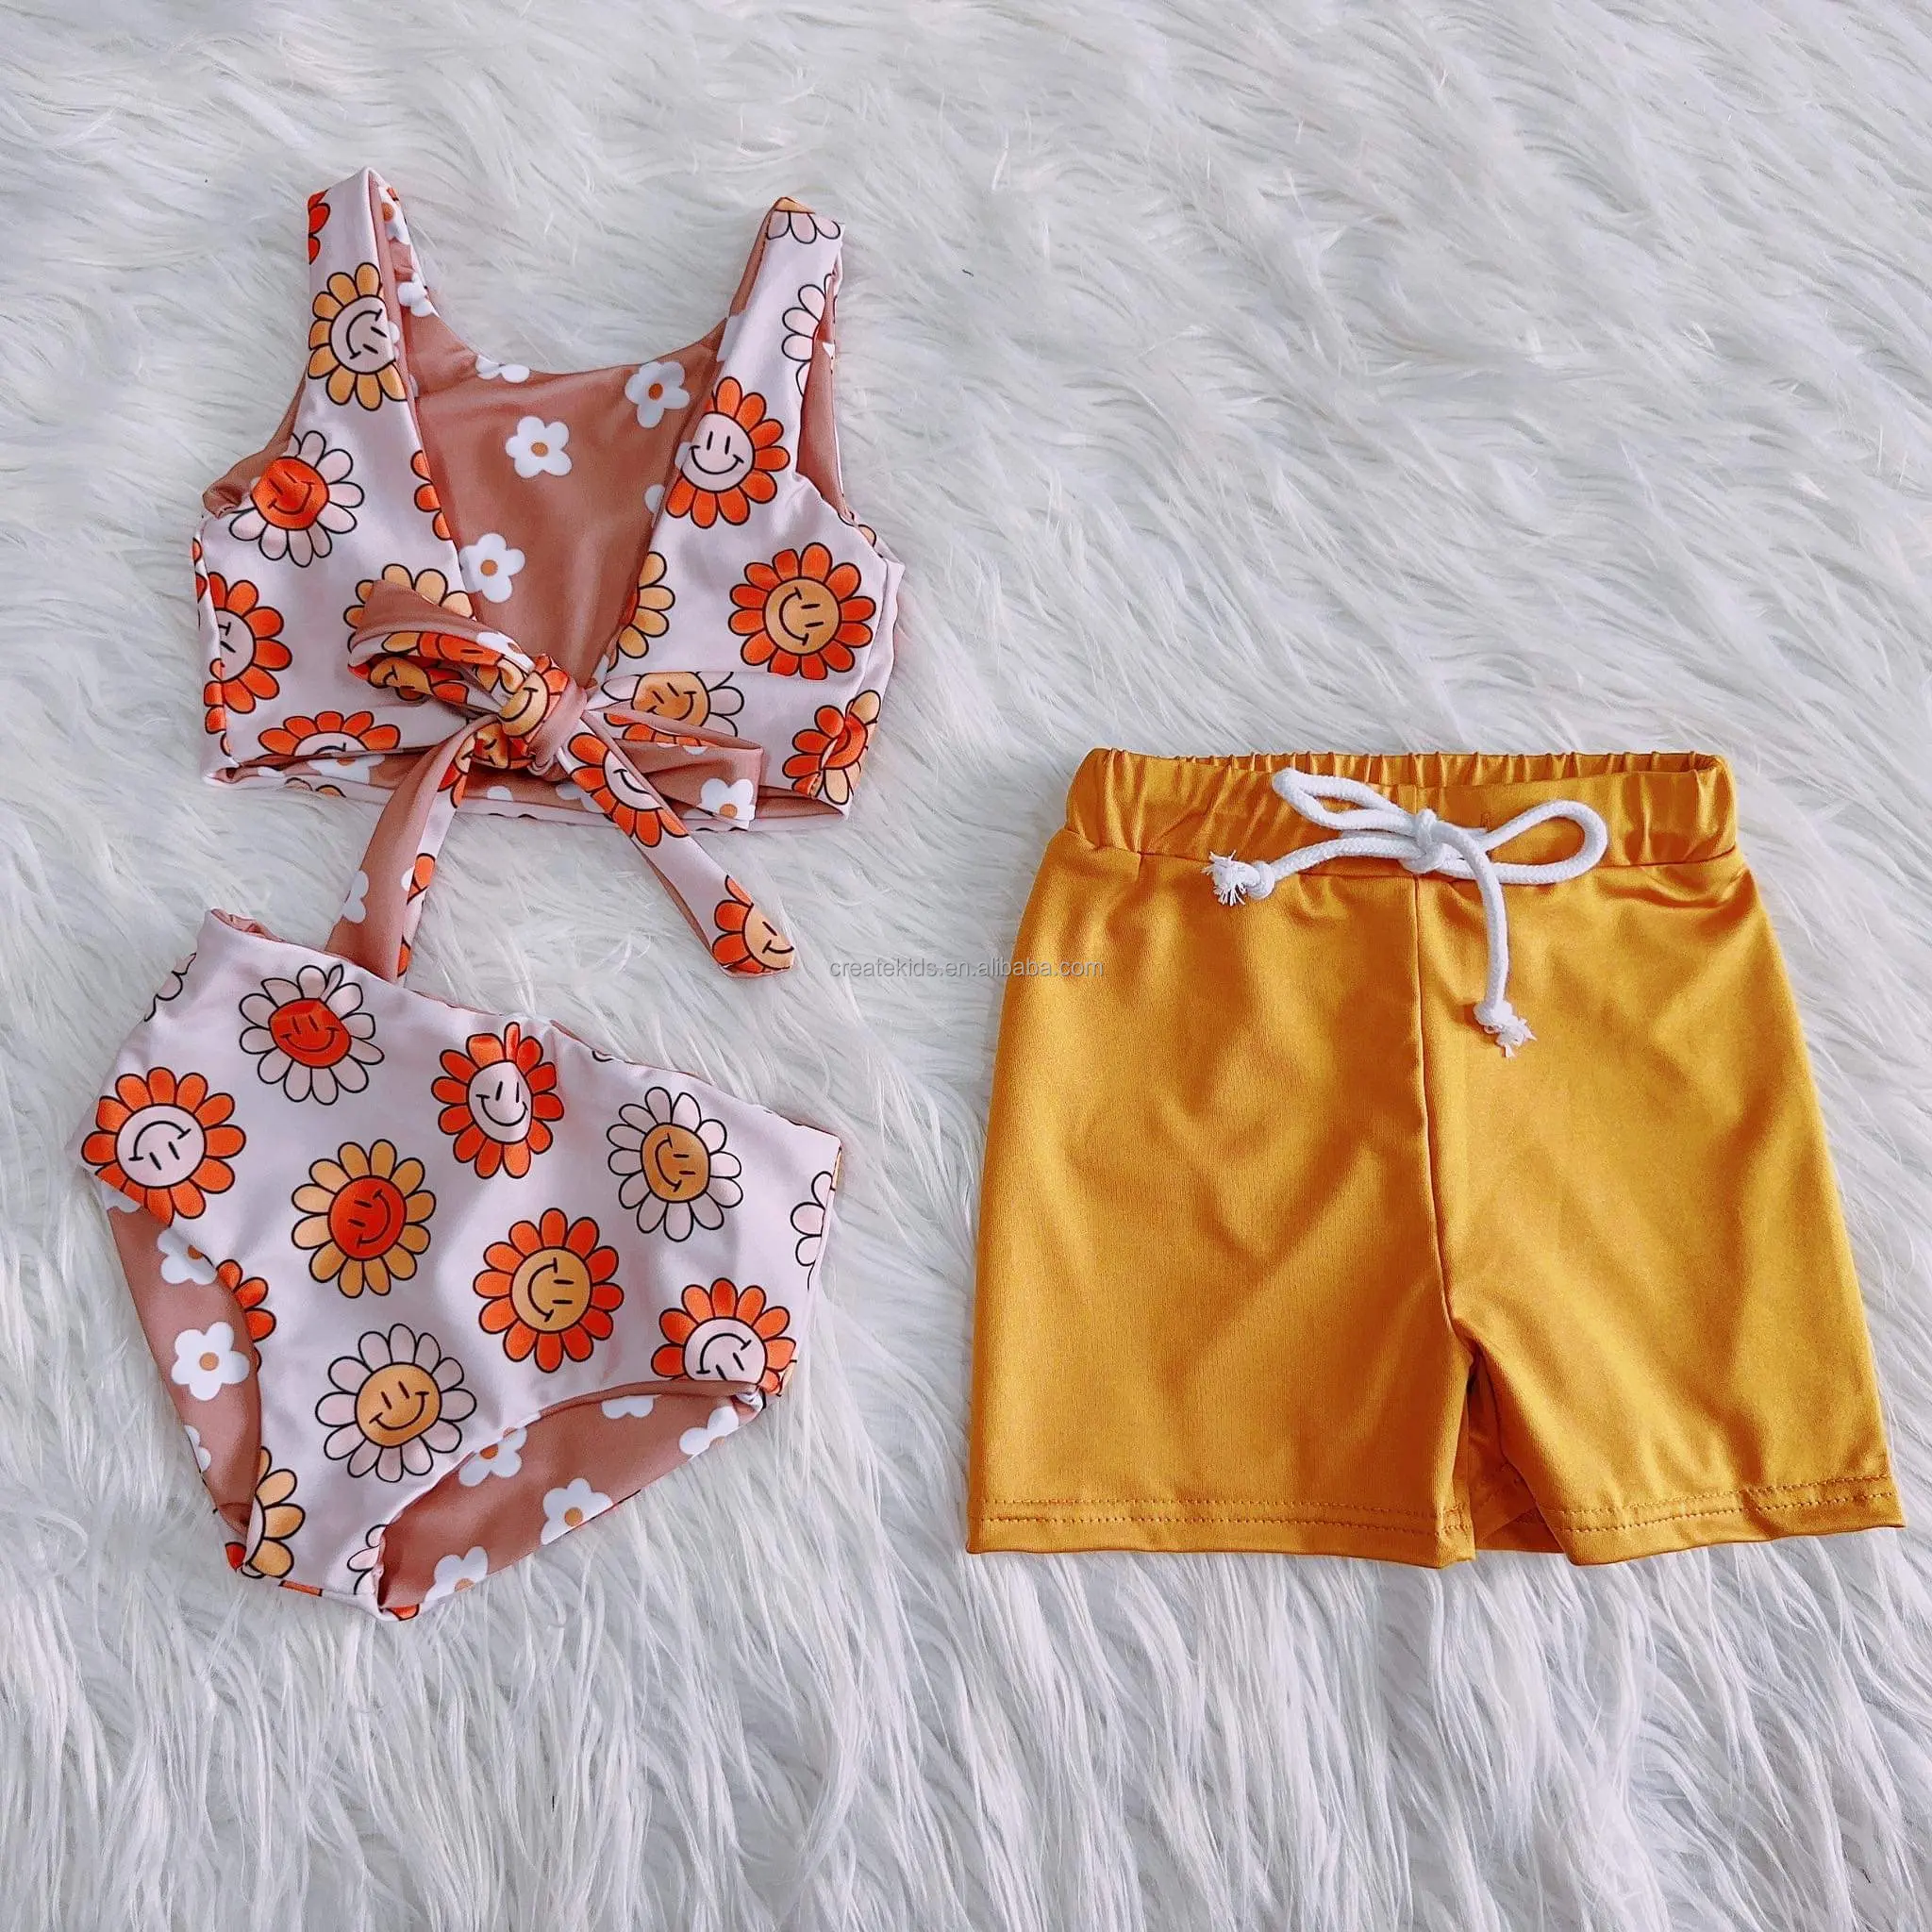 Hot Selling Reversible printed Summer Two Pieces Bathing Suits Bikini Set Baby Swimming Clothing Kids Girls Swimsuits